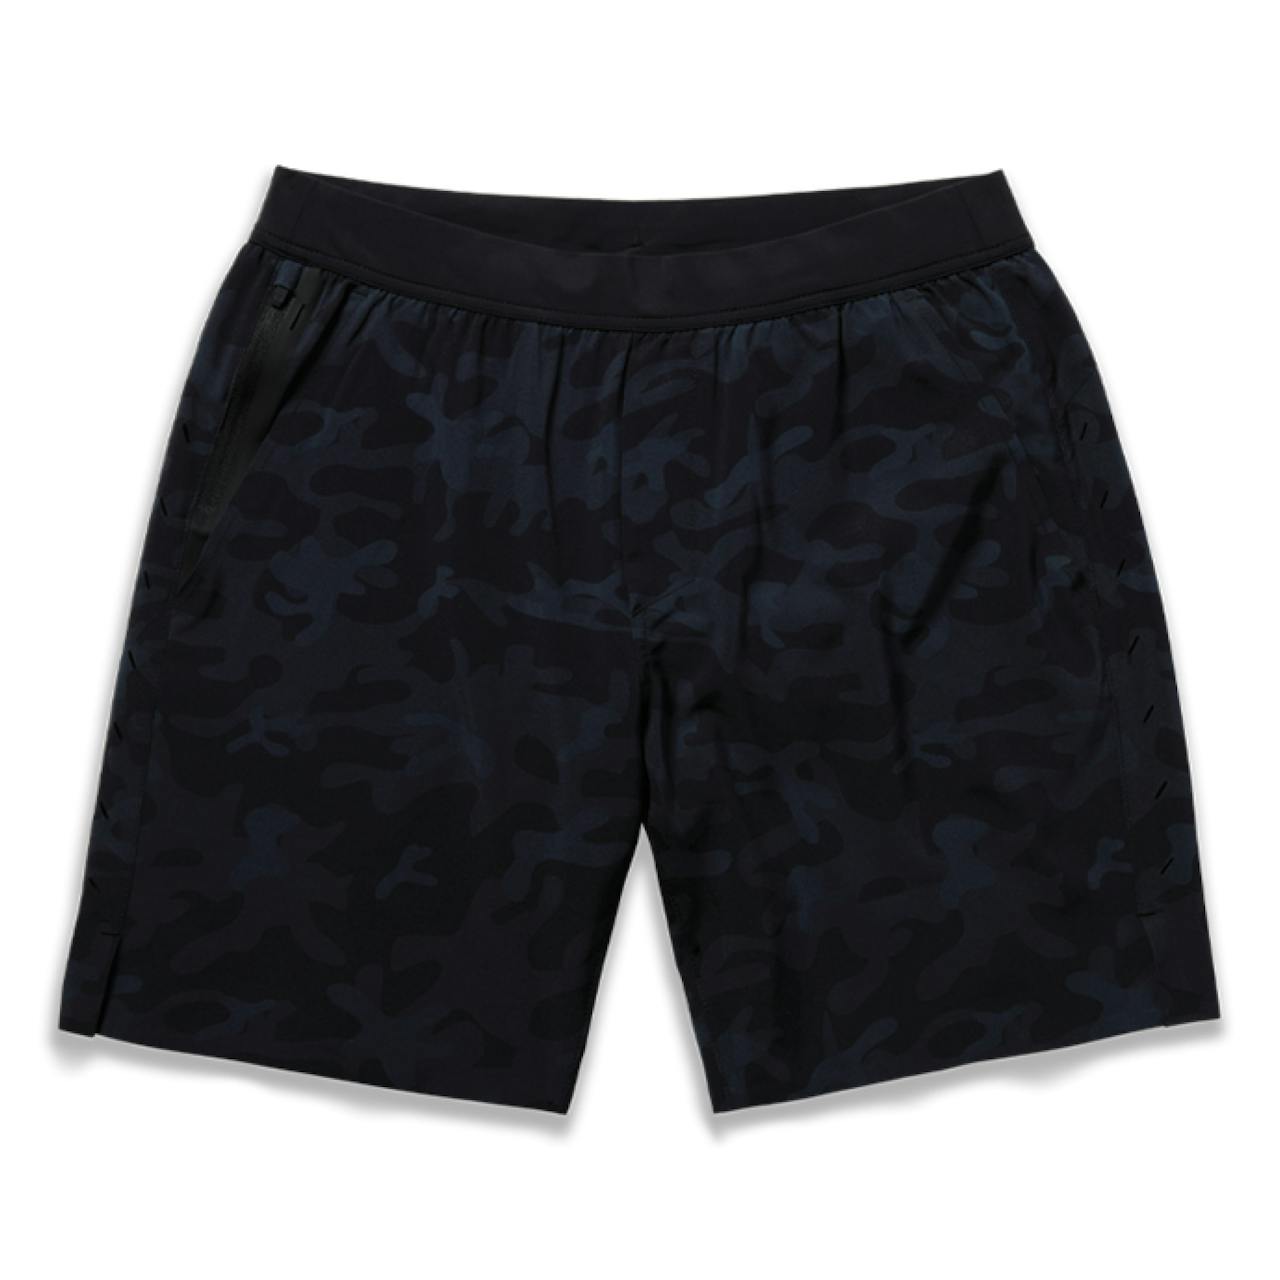 Ten Thousand Interval Short - 7" with Liner